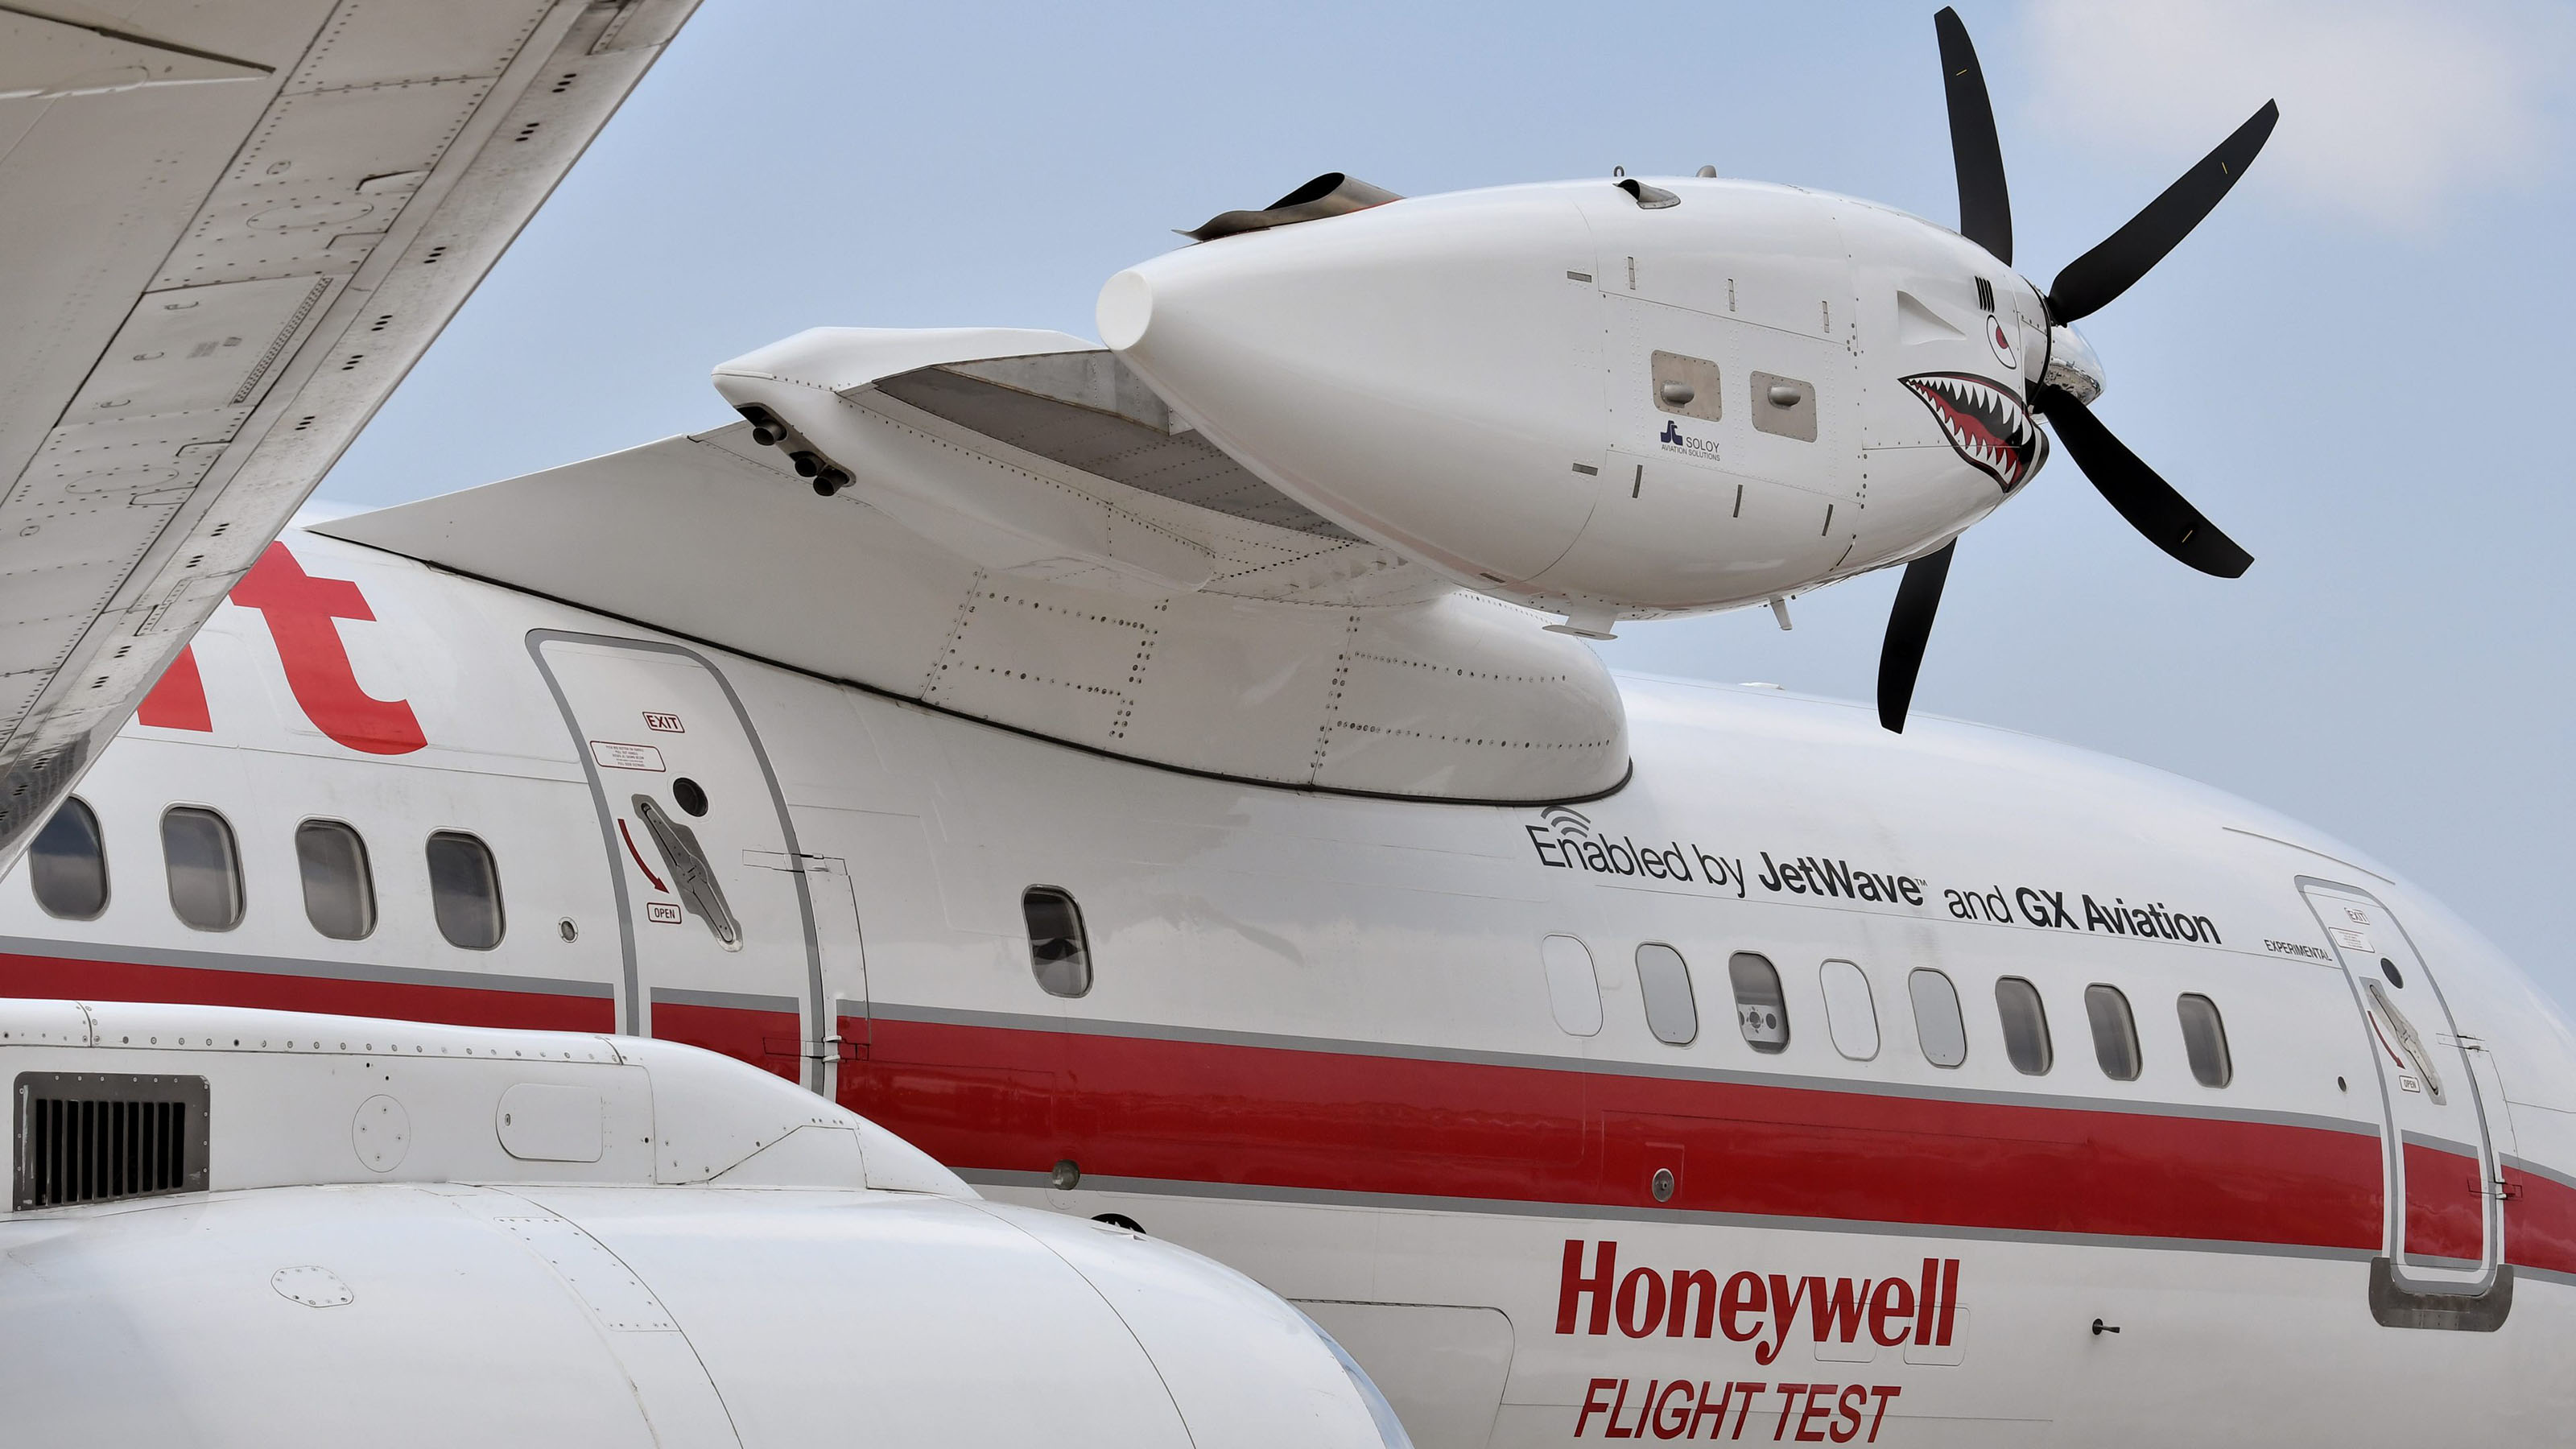 A Honeywell TPE331-14 turboprop engine is mounted on the company's Boeing 757 test aircraft. It's the first turboprop to be tested on the large jet, which made its first visit to EAA AirVenture this year. Photo by Mike Collins.